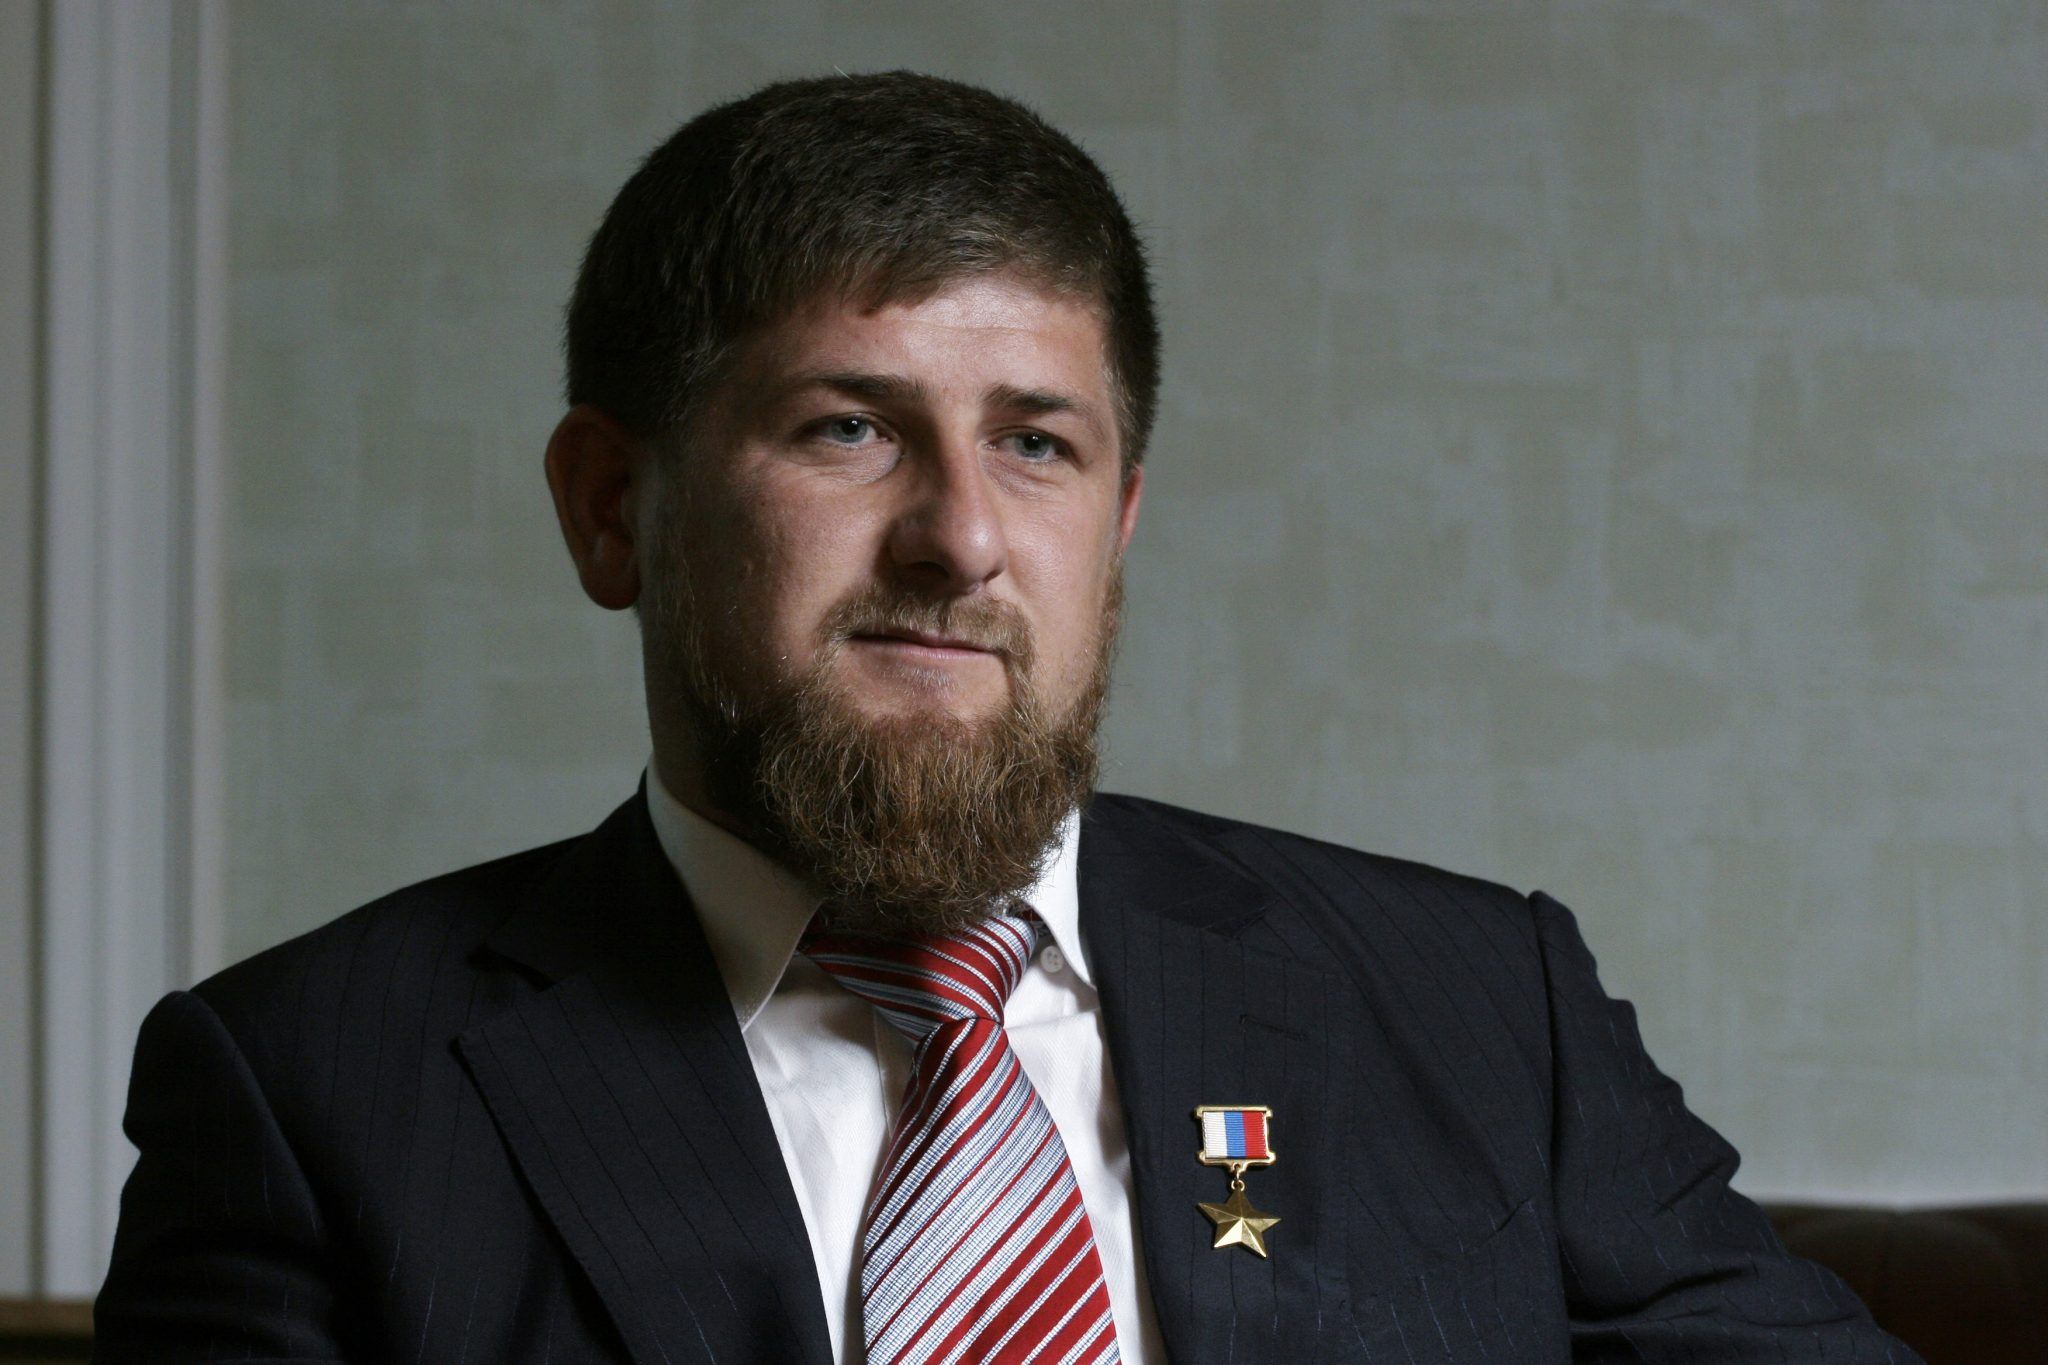 Chechen leader wears $1,500 Prada boots to address special forces amid  Ukraine conflict